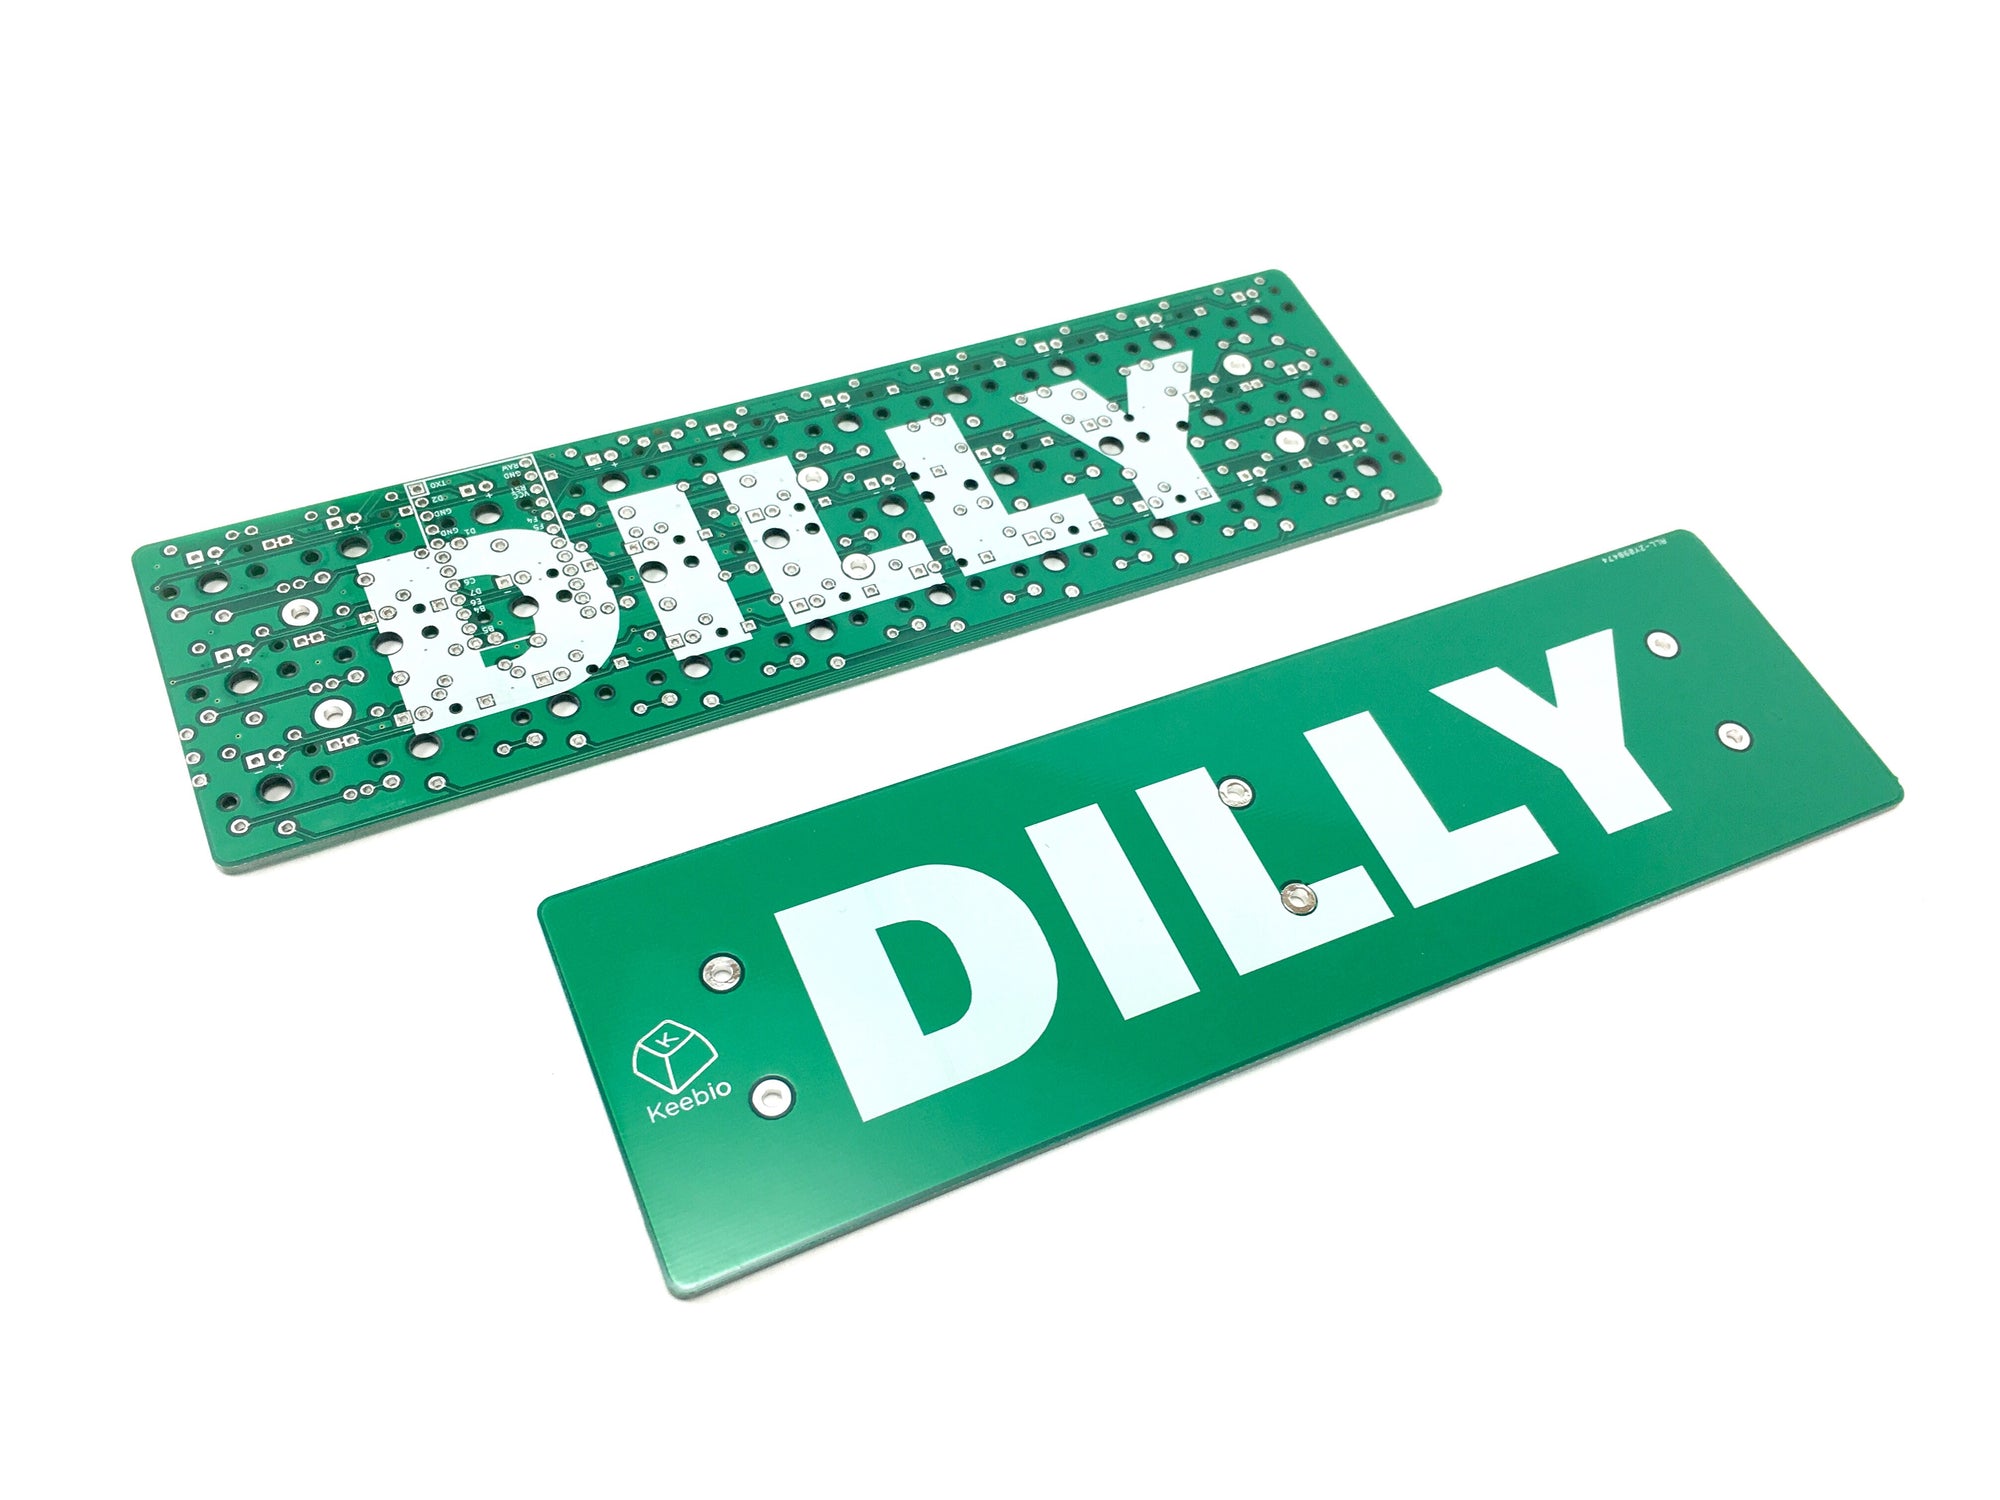 Dilly - 3x10 Ortholinear Keyboard for Kailh Choc Low-Profile Switches